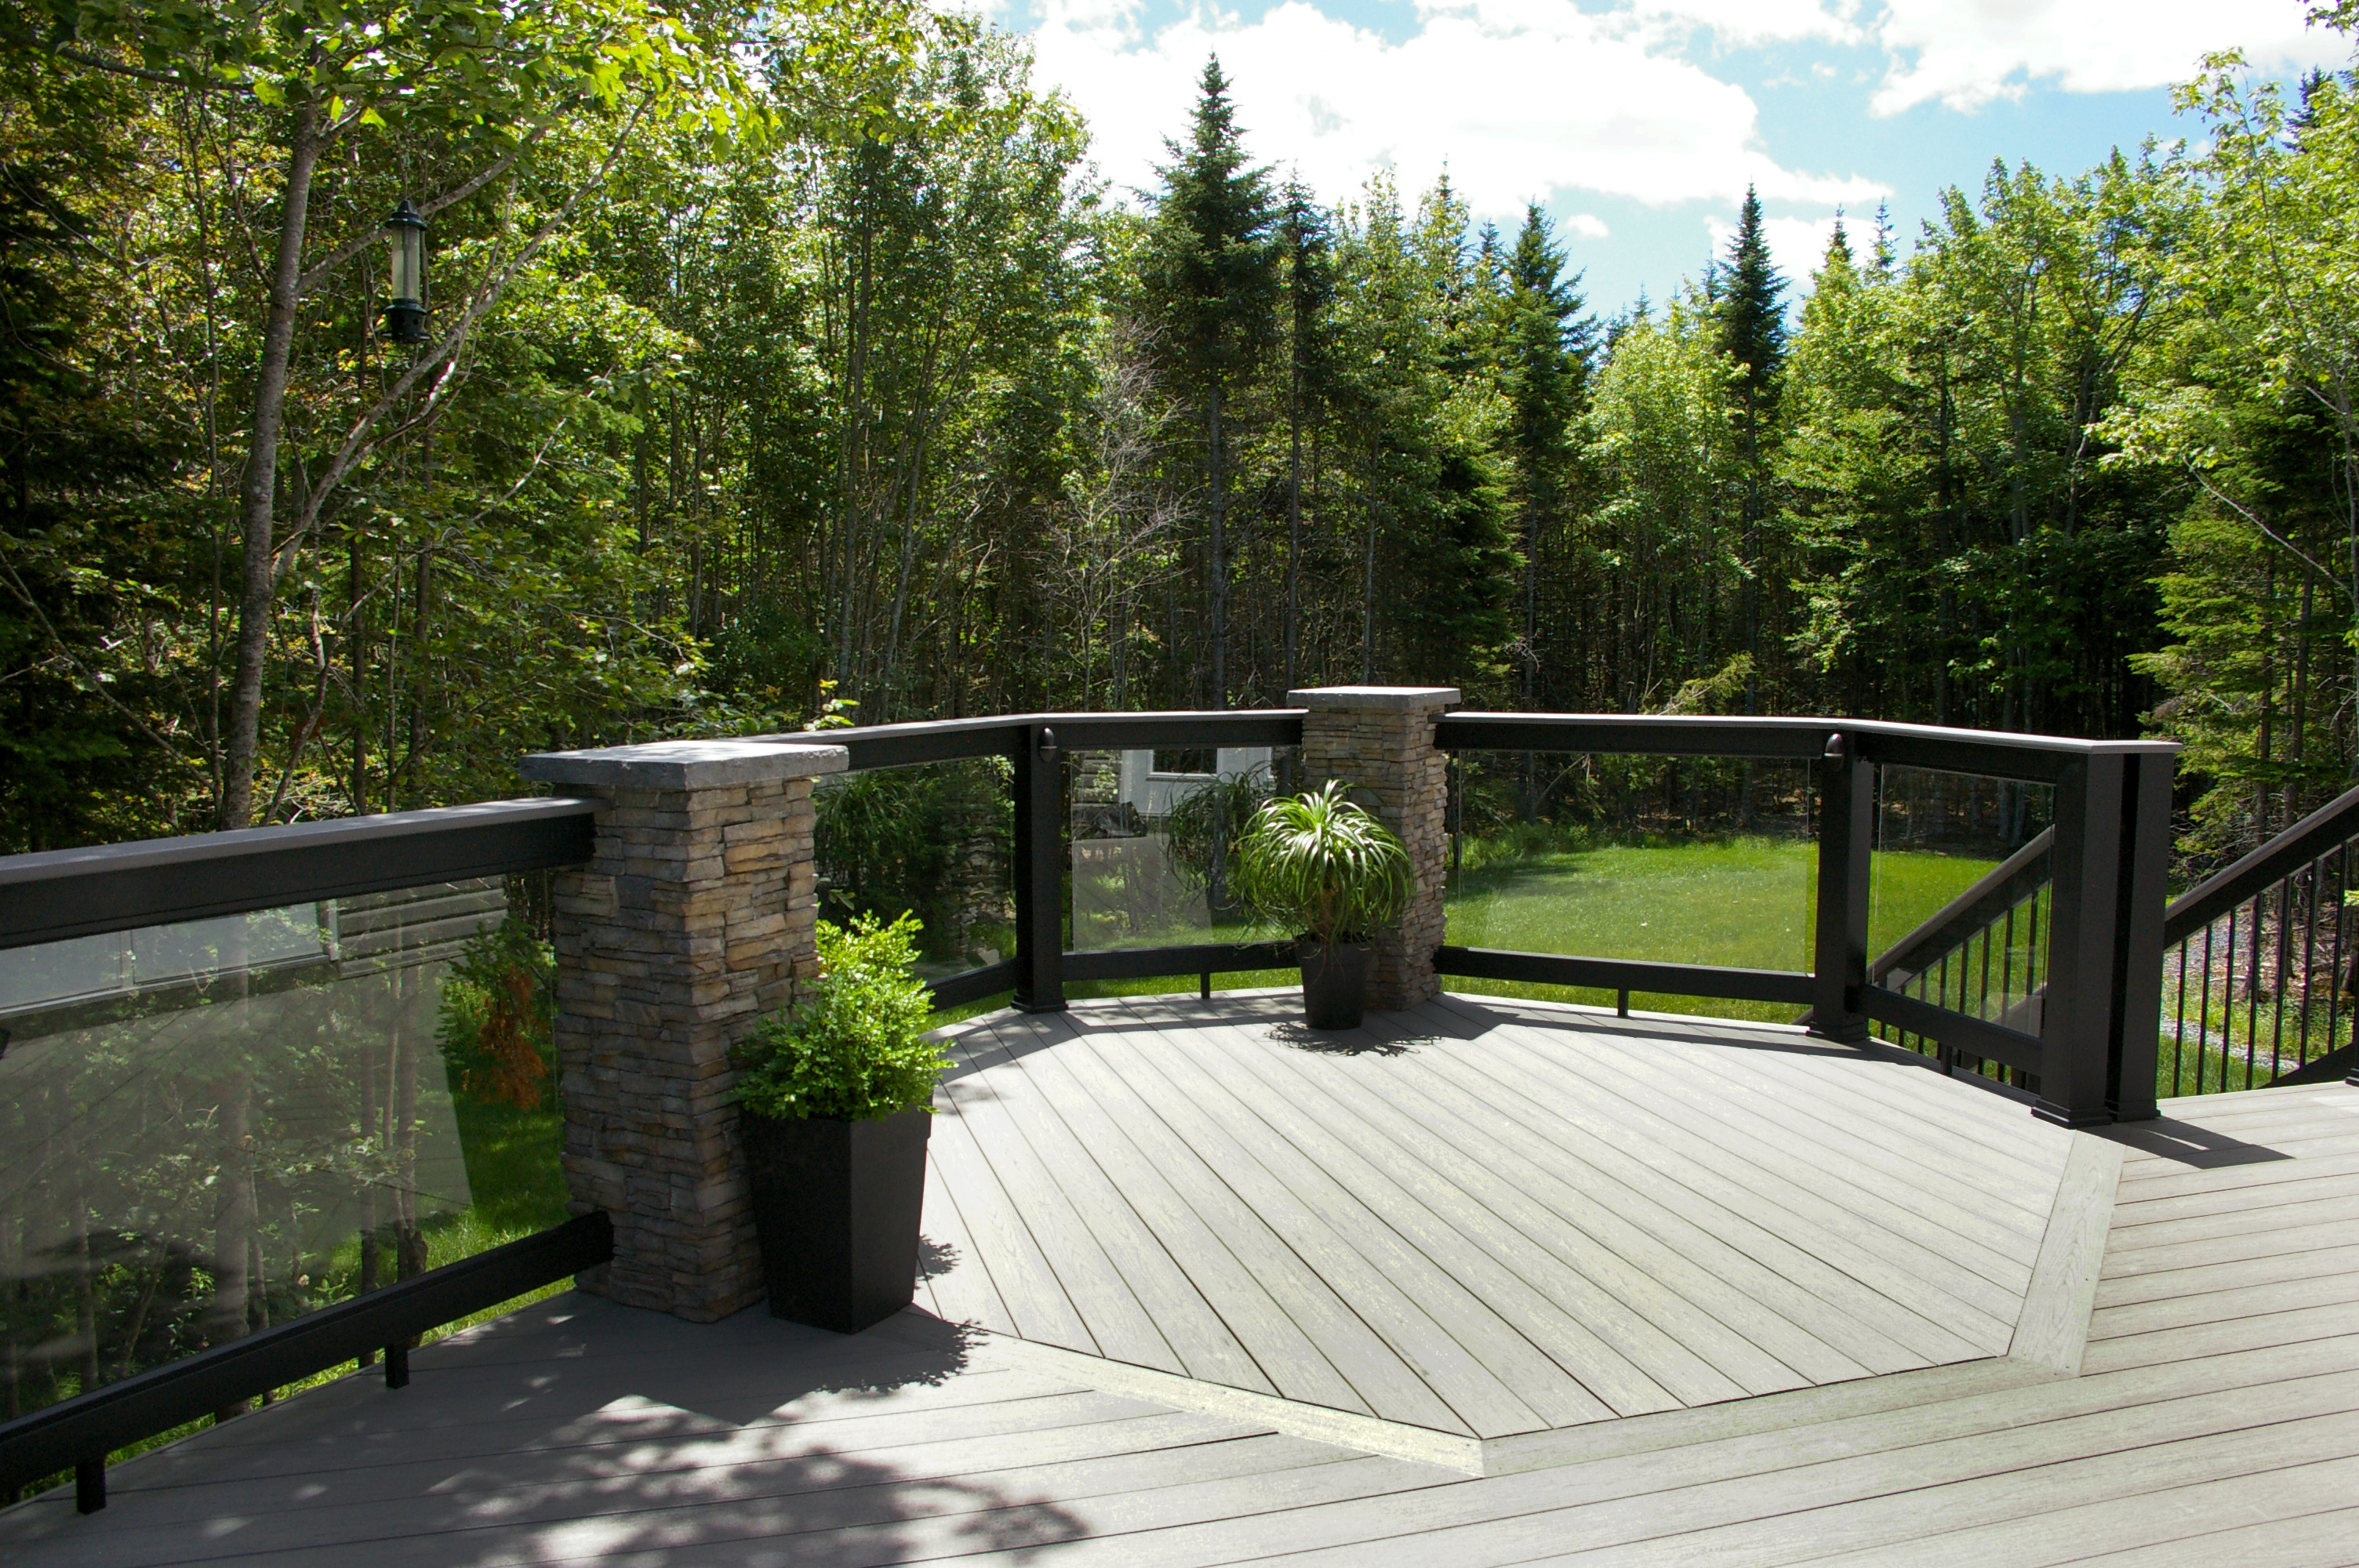 To construct this award-winning deck, Archadeck of Nova Scotia removed and replaced the homeowner's outdated deck with a multi-level entertainment area. Silver Maple TimberTech composite decking is accented with black aluminum railing and glass inlays to maximize their view. Riser lights were added to safely guide residents up and down the steps. 
